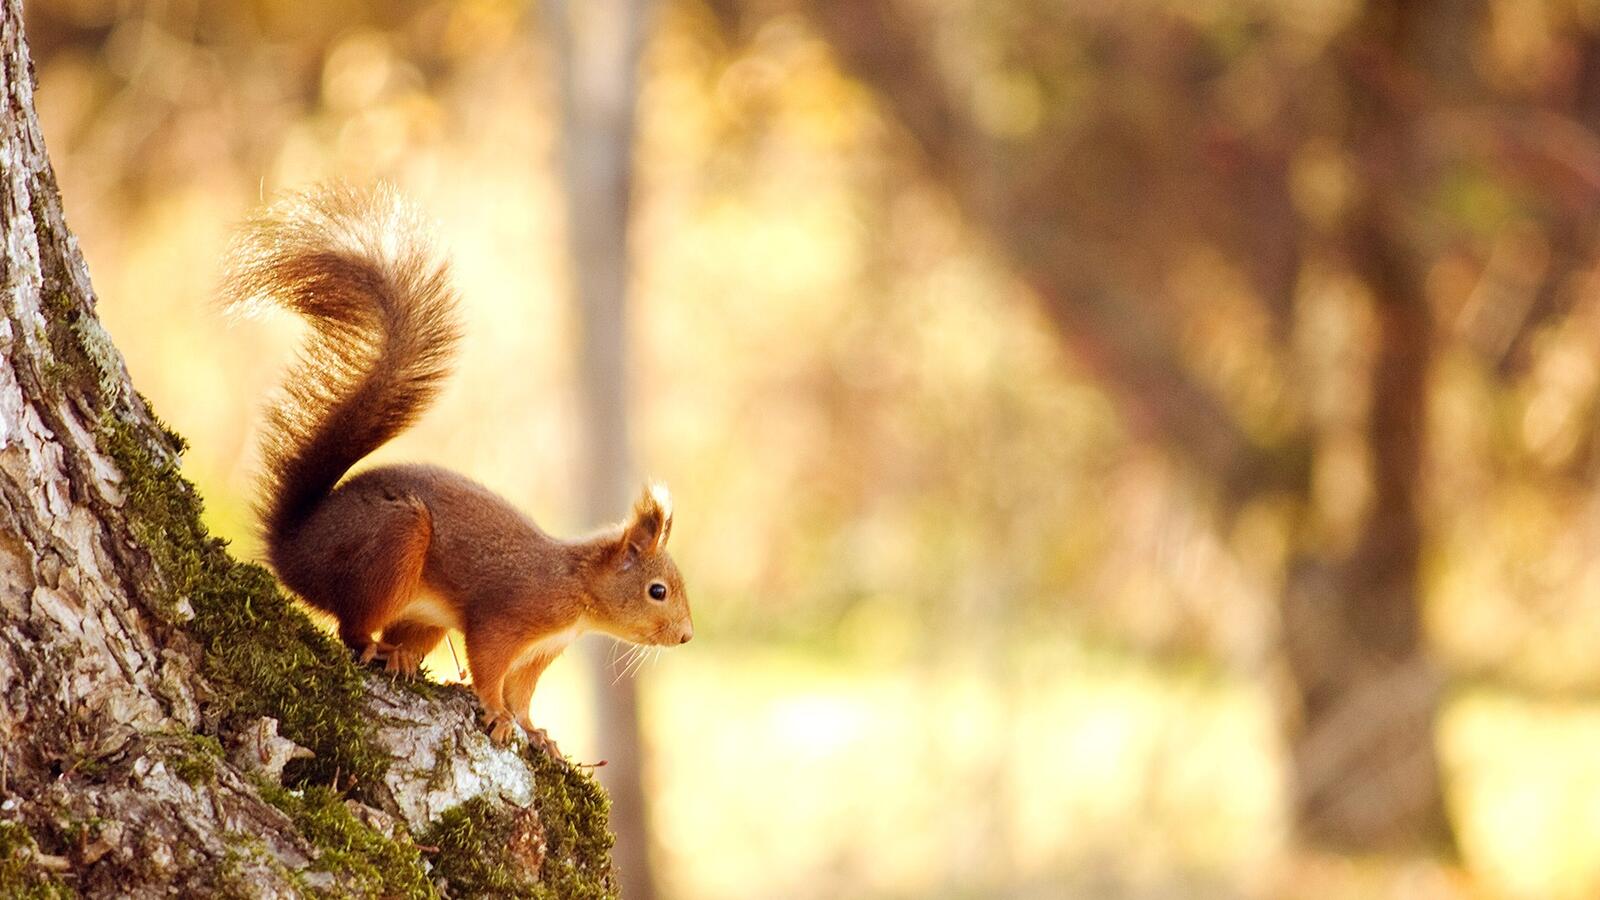 Free photo A red squirrel prepares to jump from a tree